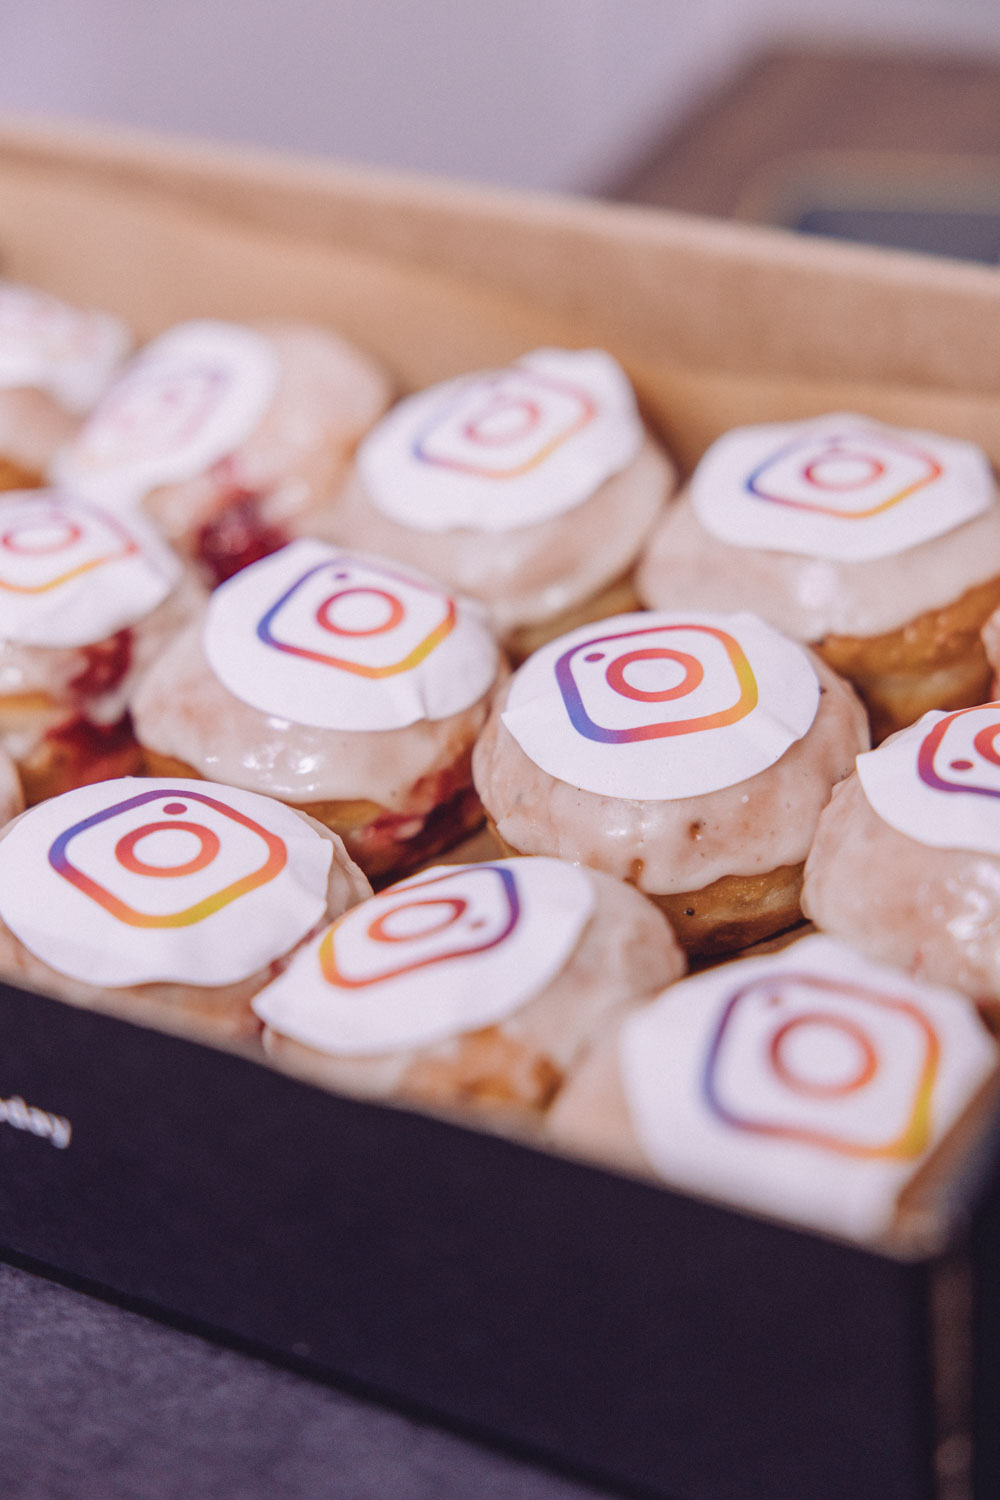 Instagram Doughnuts at the bCreator Health & Wellbeing Show